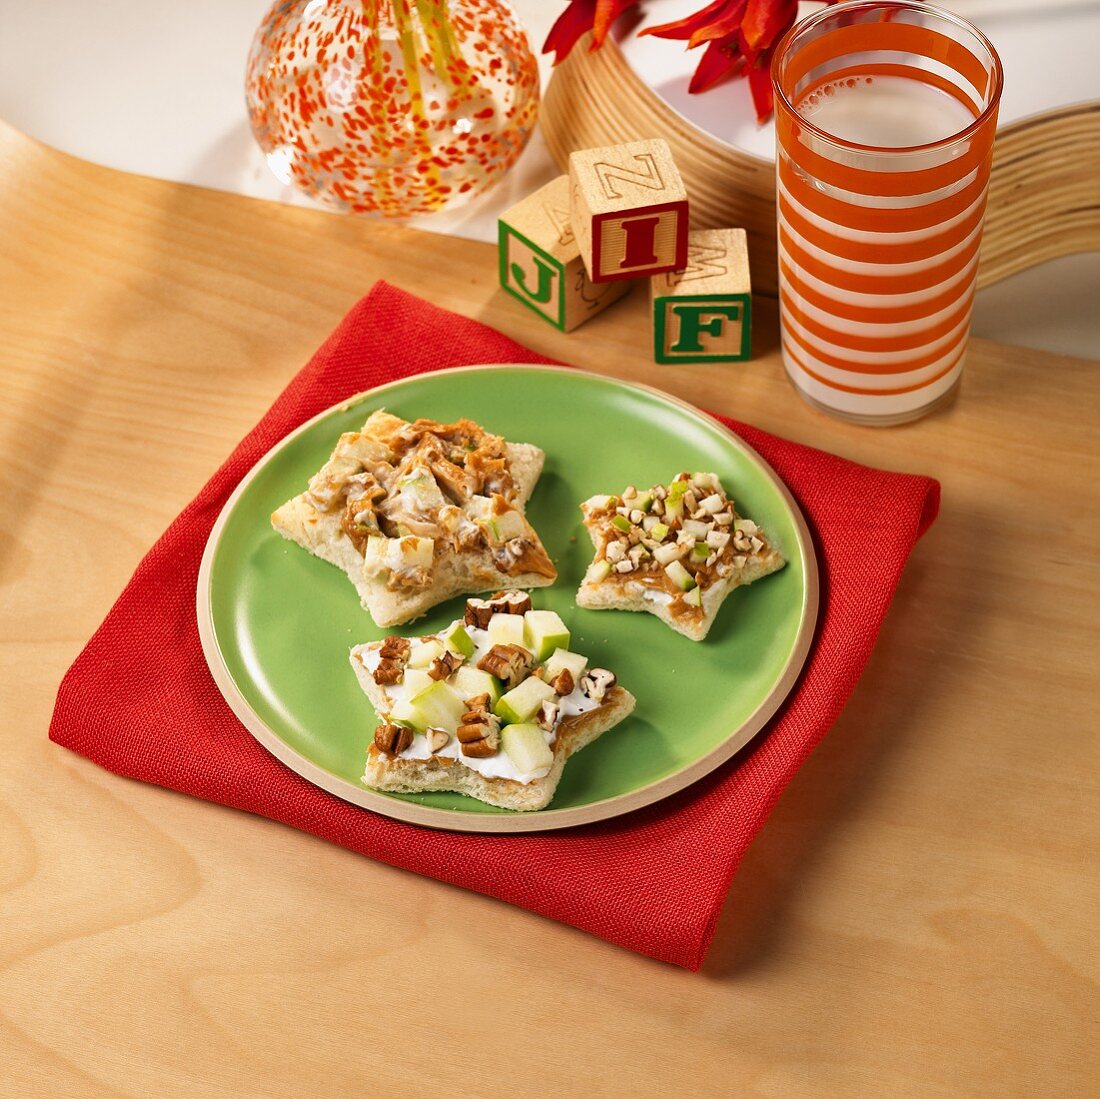 White Bread Stars Topped with Apples, Pecans and Peanut Butter